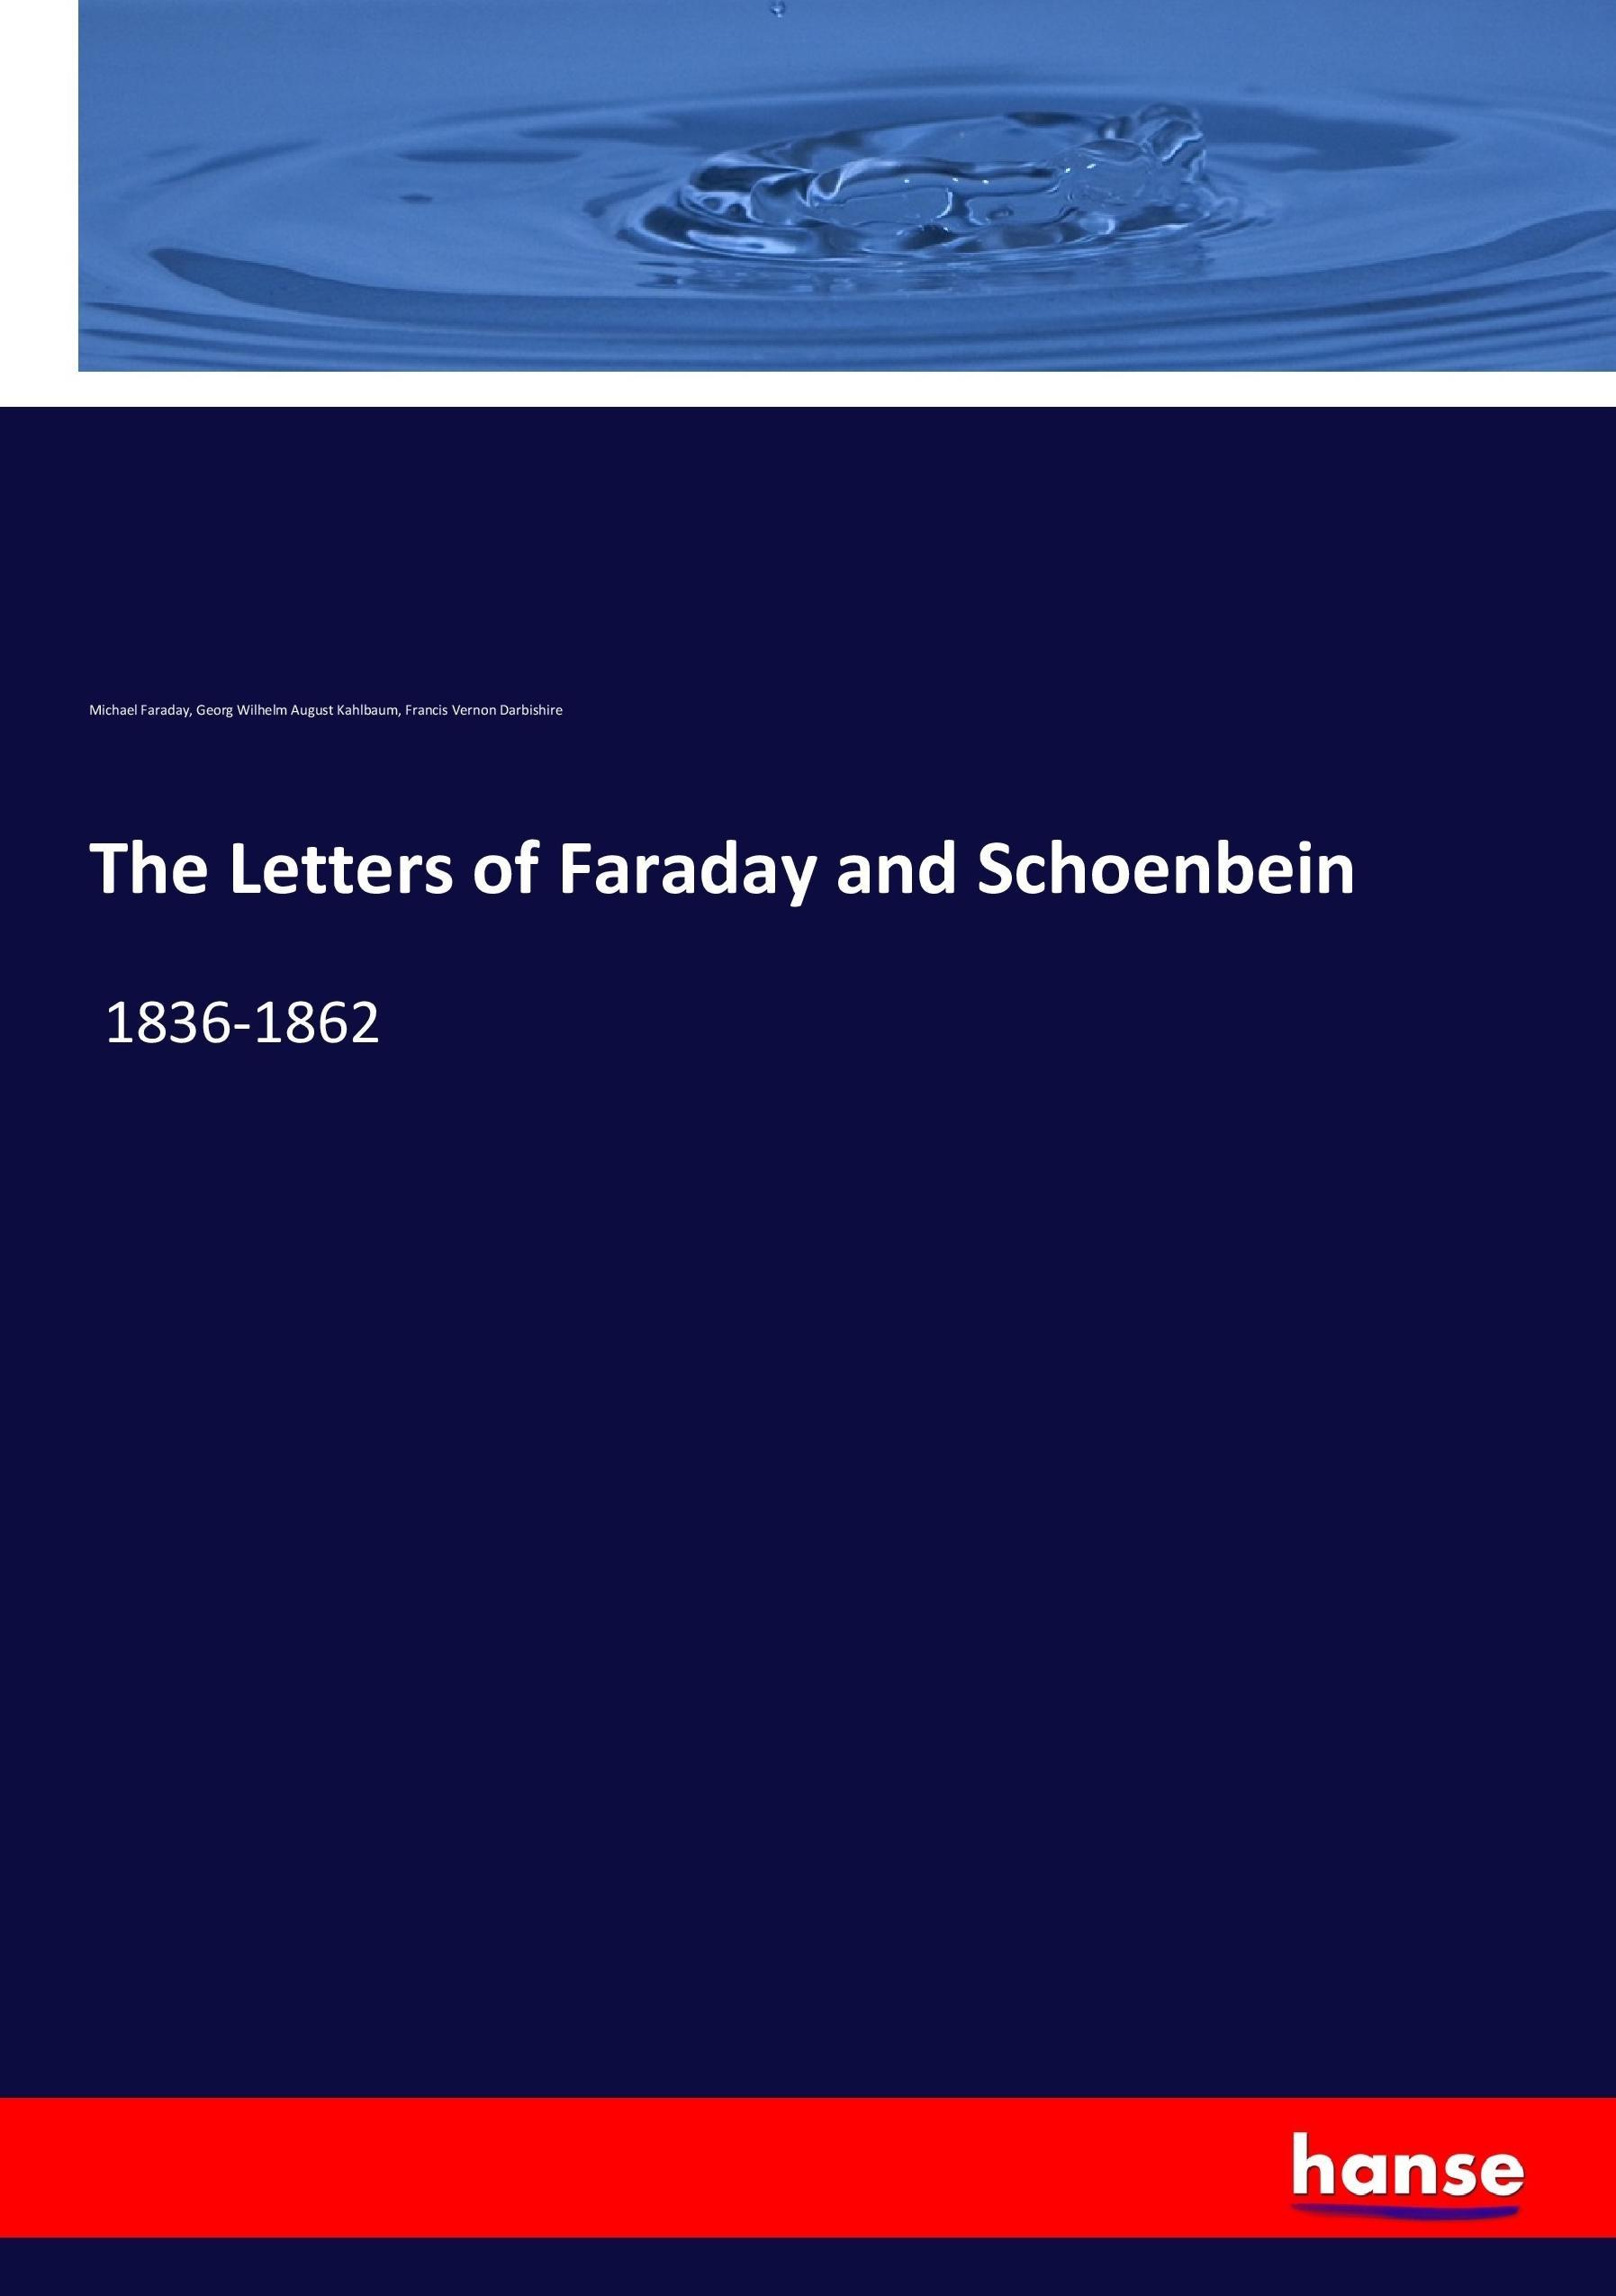 The Letters of Faraday and Schoenbein - Faraday, Michael Kahlbaum, Georg Wilhelm August Darbishire, Francis Vernon